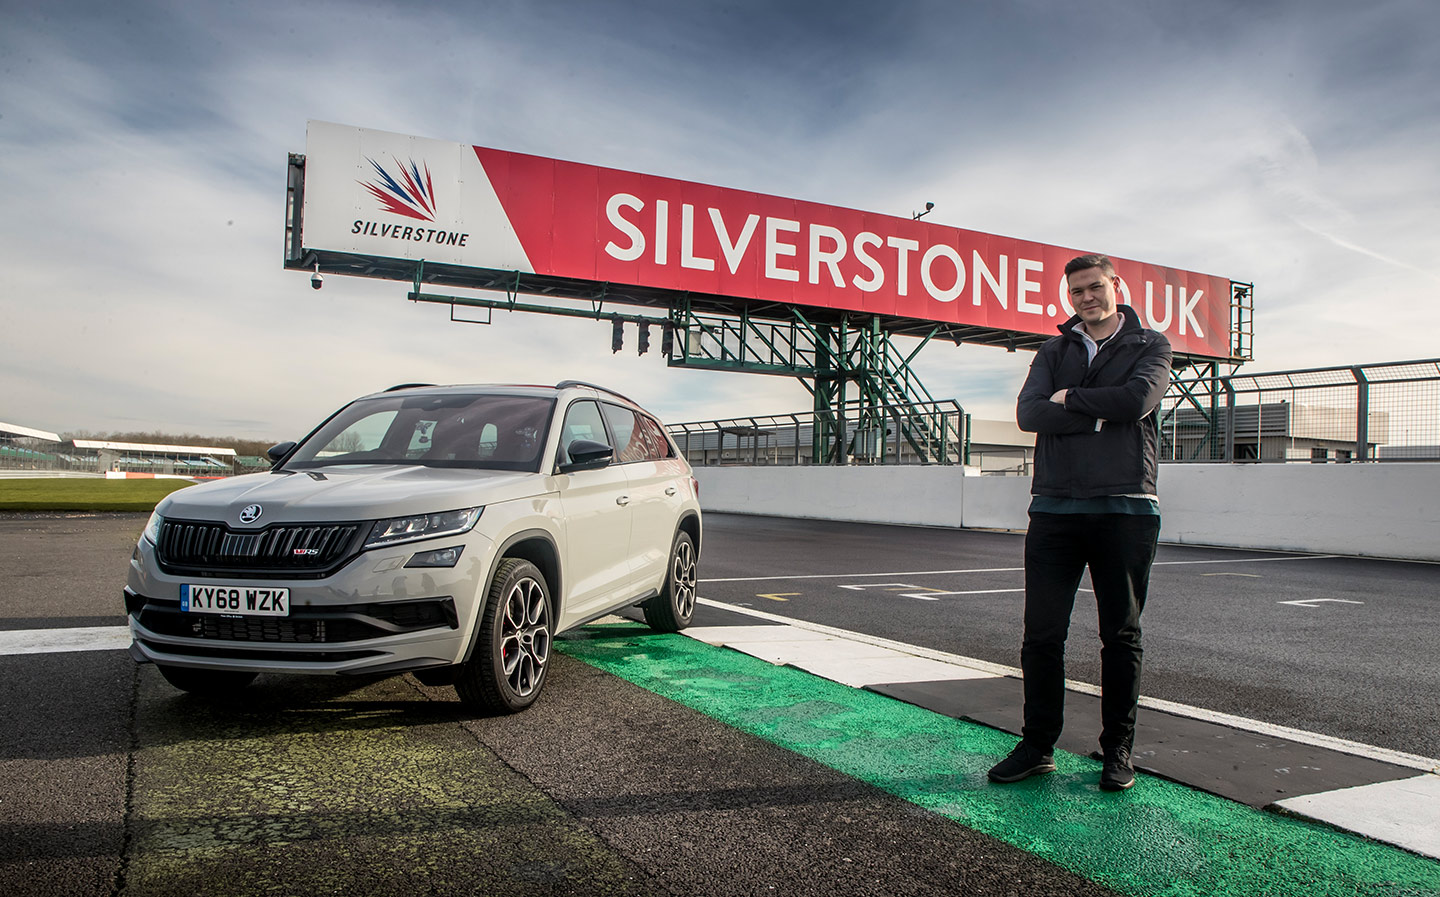 2019 Skoda Kodiaq vRS: Silverstone challenge on track and ice driving ultimate test (video) with Will Dron for Driving.co.uk